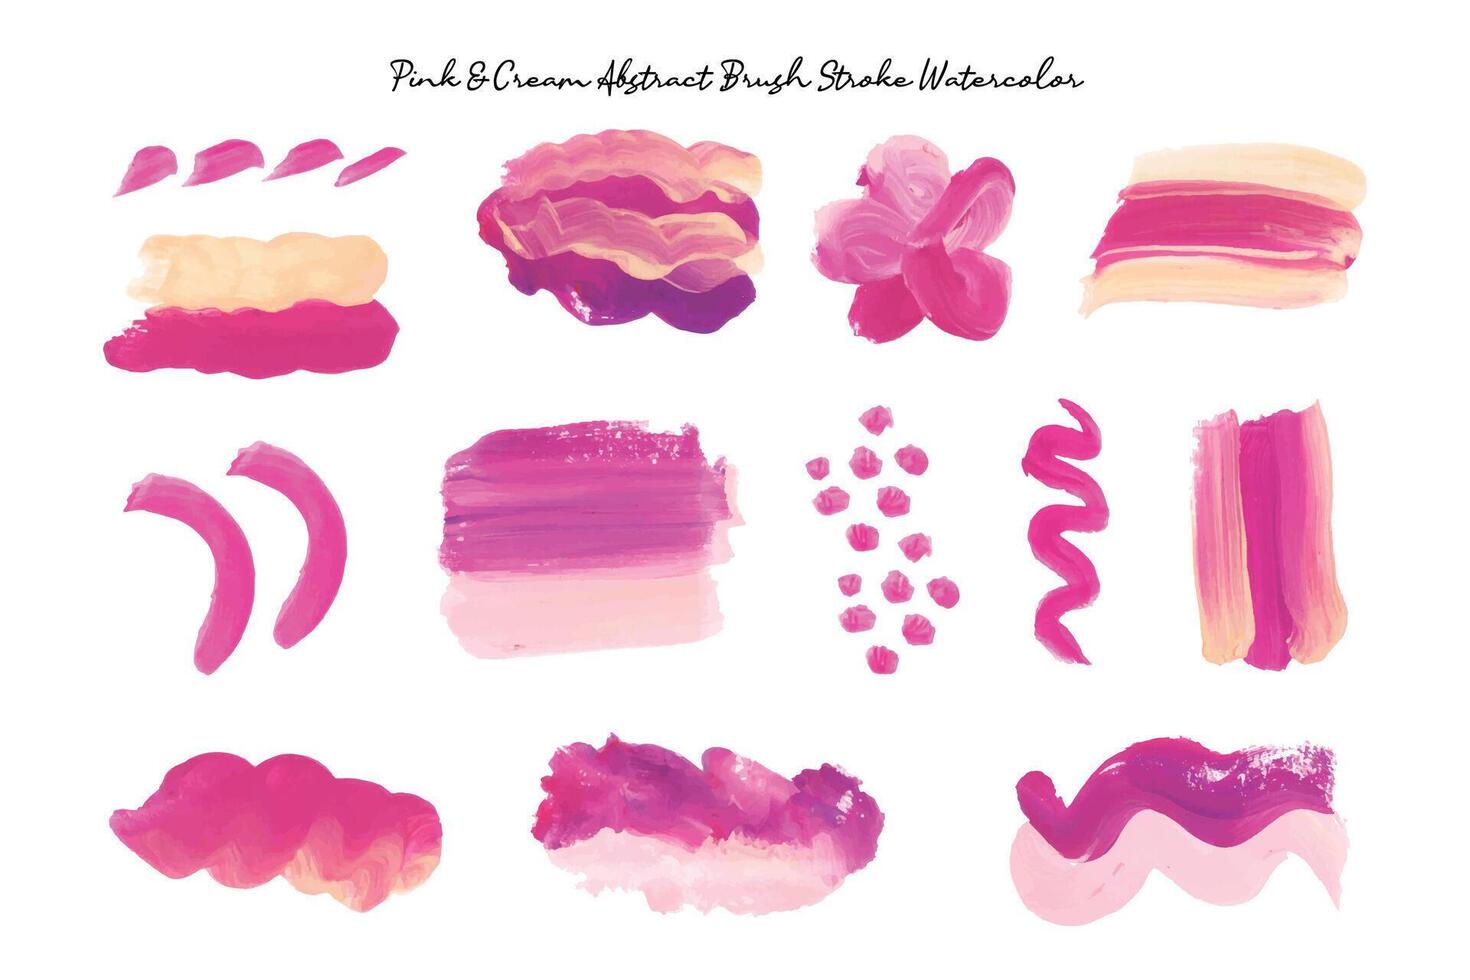 Aesthetic Pink Abstract Shape and Brush Stroke Collection vector